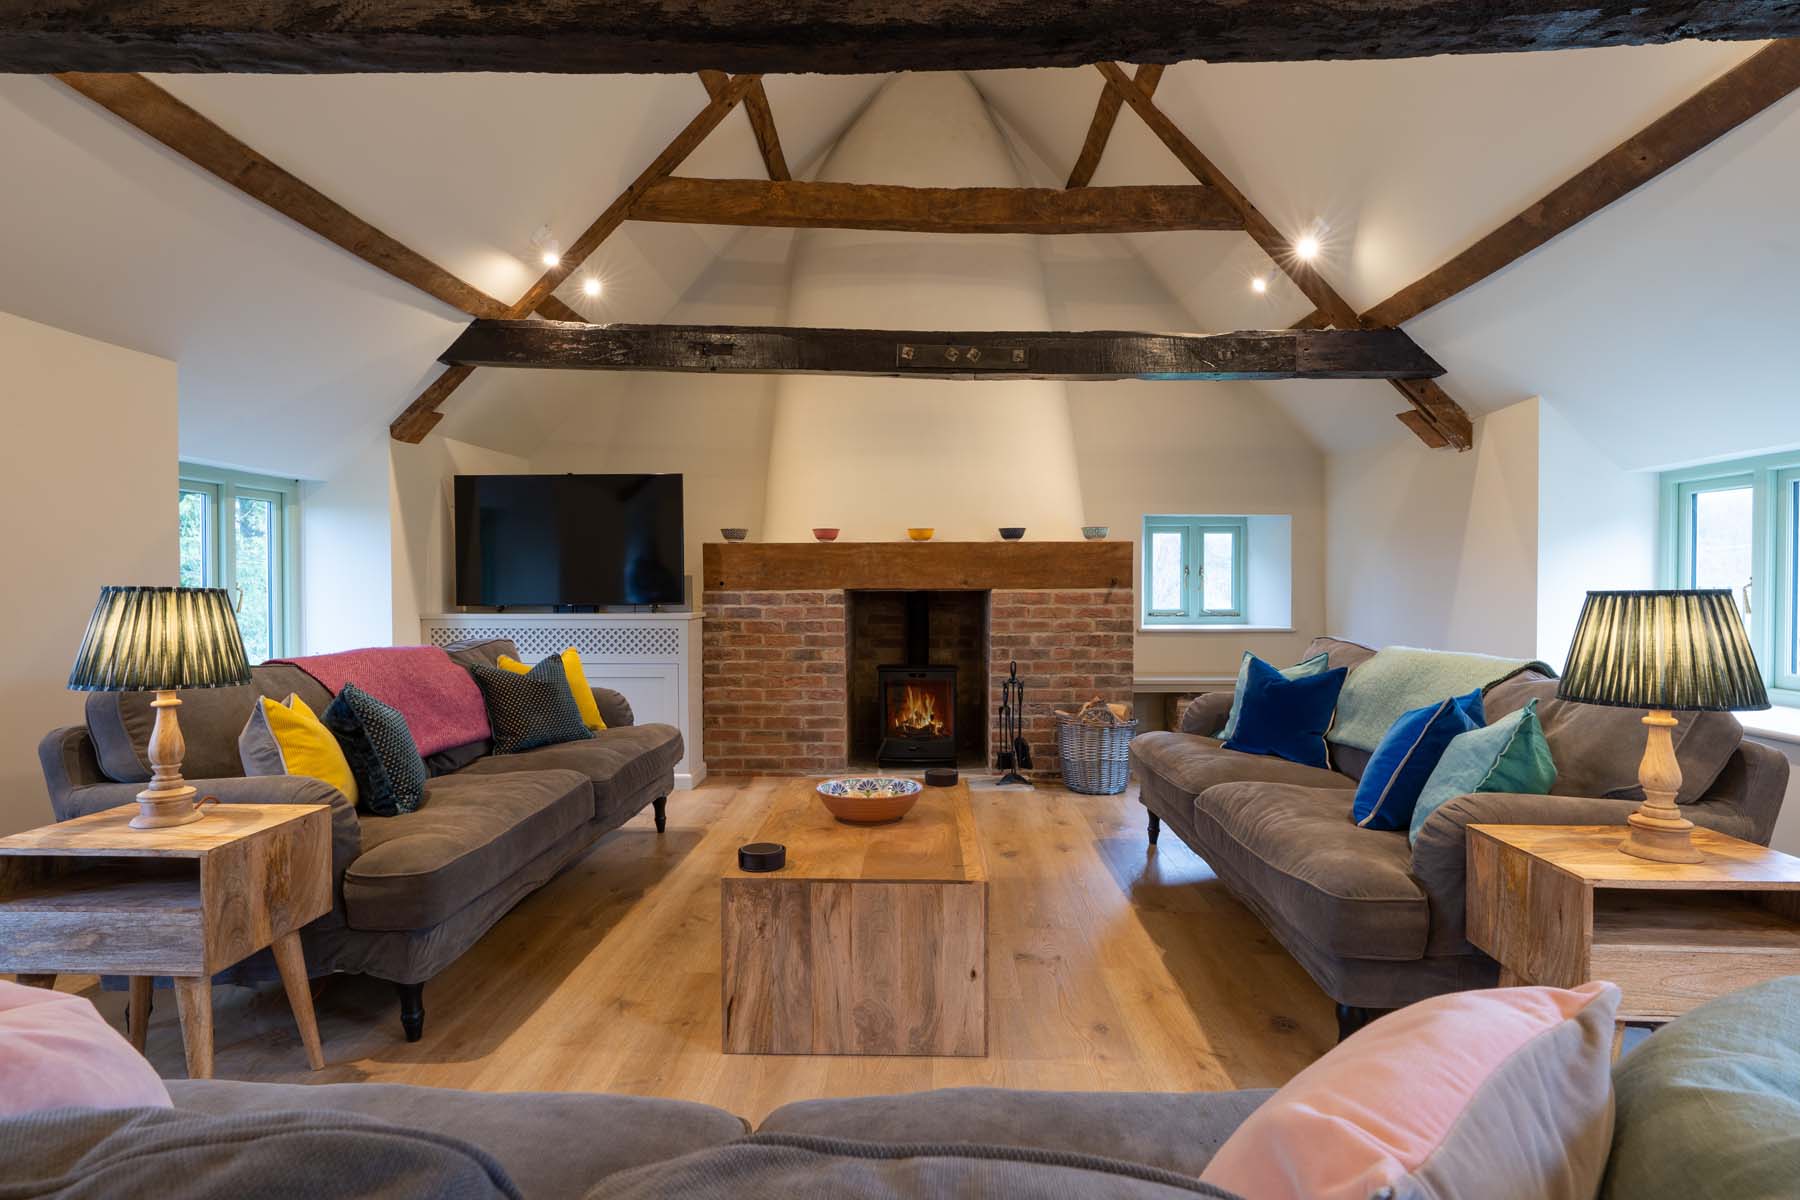 Cosy living room with wooden beams and log burner